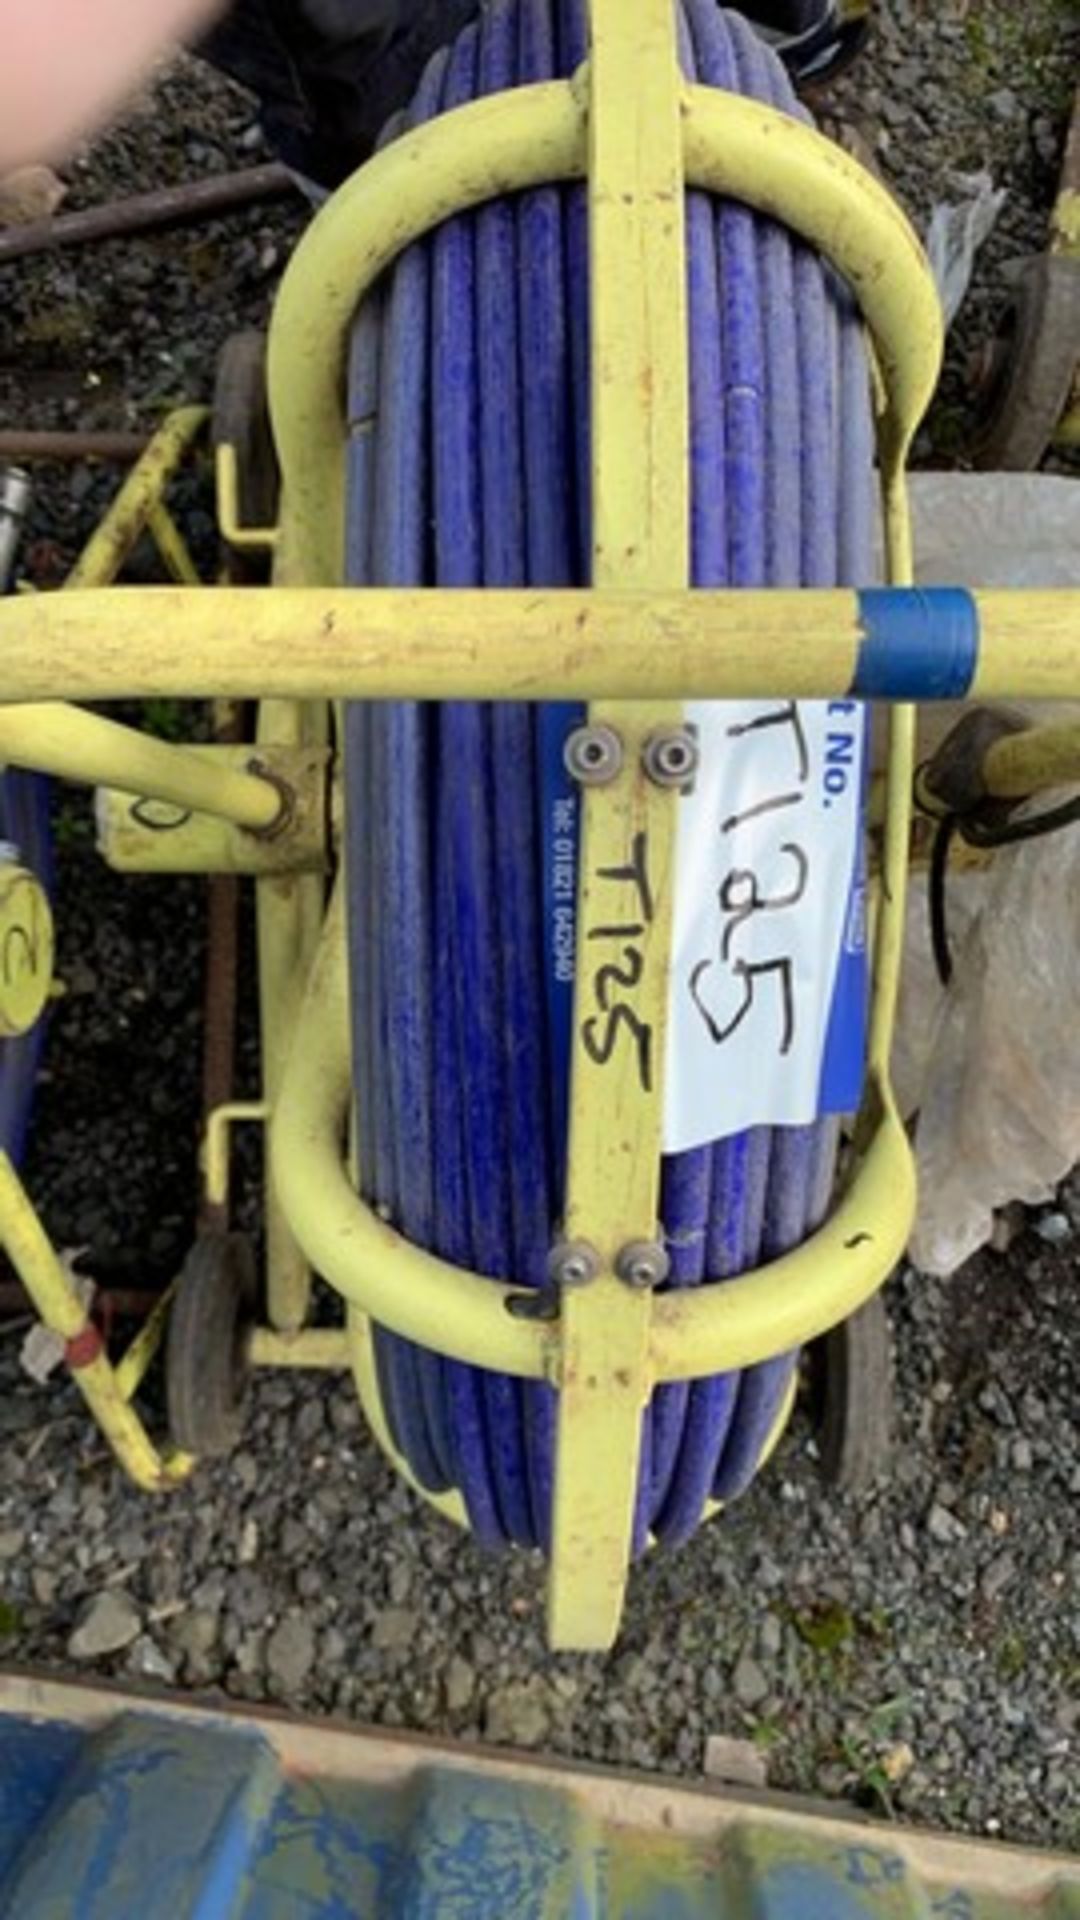 Optical drainage inspection cable on reel